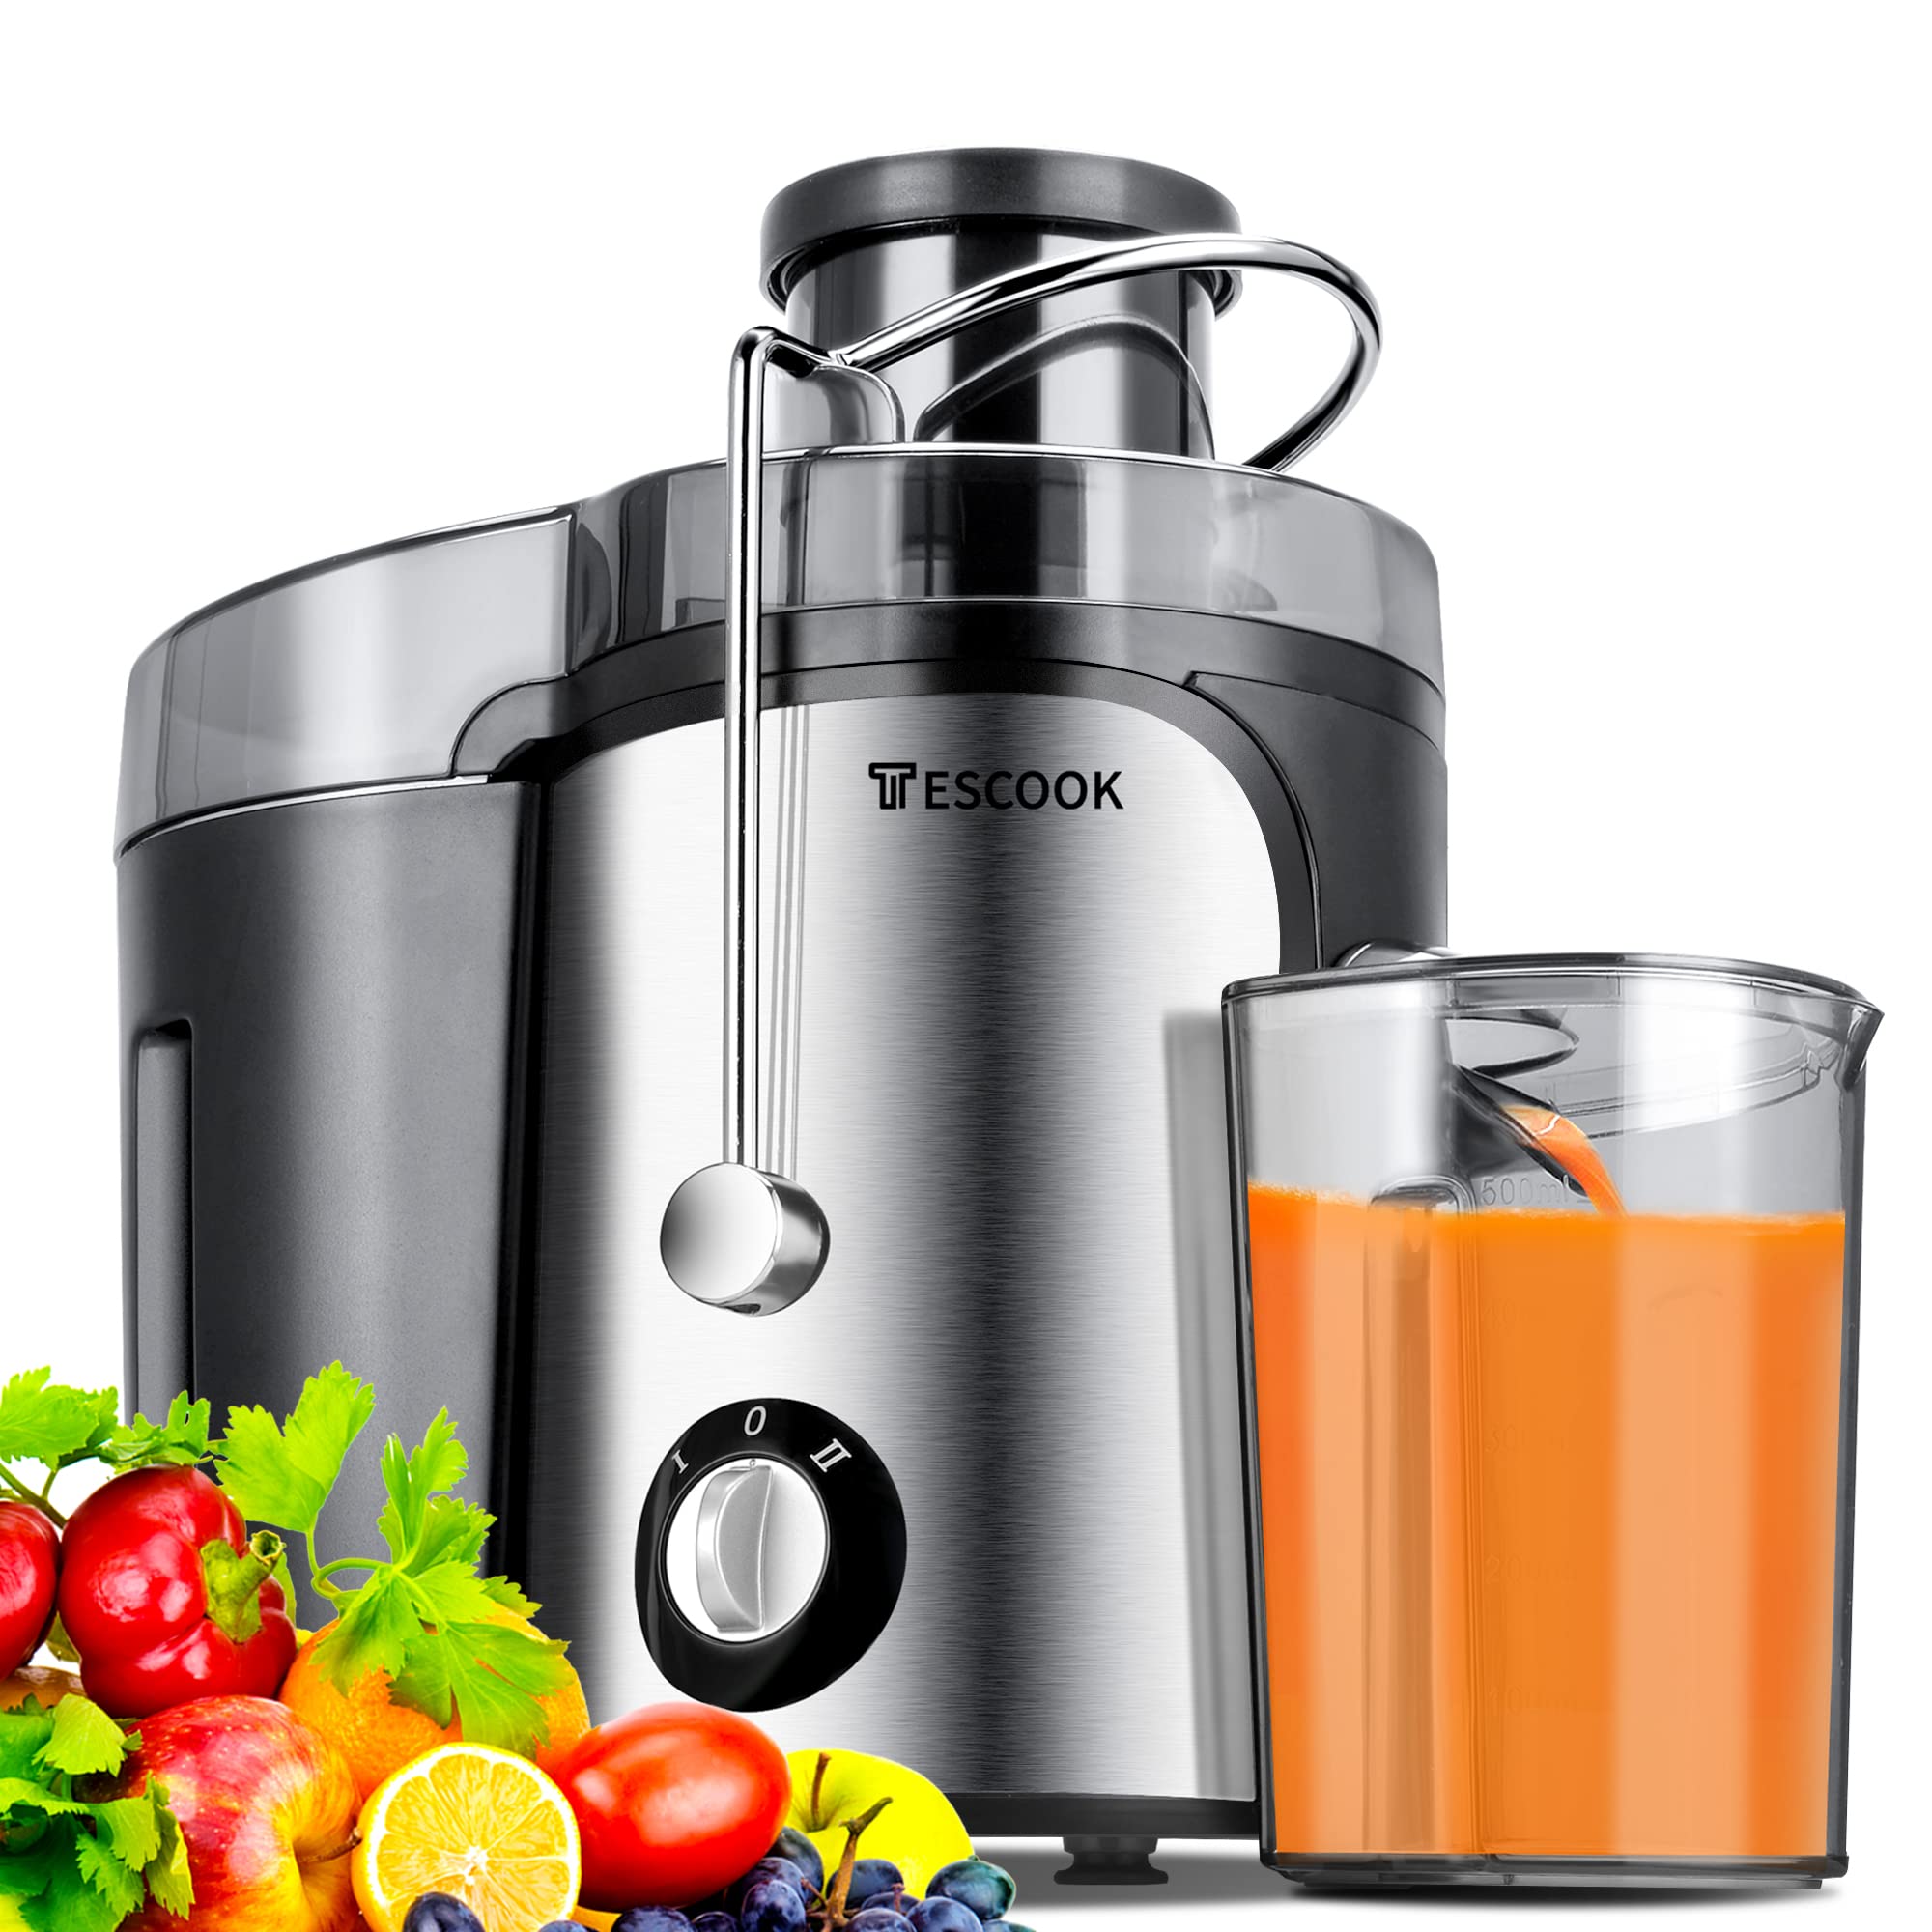 Tescook Juicer, 600W Juicer Machines 3 Speeds with 3 Feed chute, Juicer Extractor for Whole Fruits & Vegs, Dishwasher Safe, BPA-Free, No